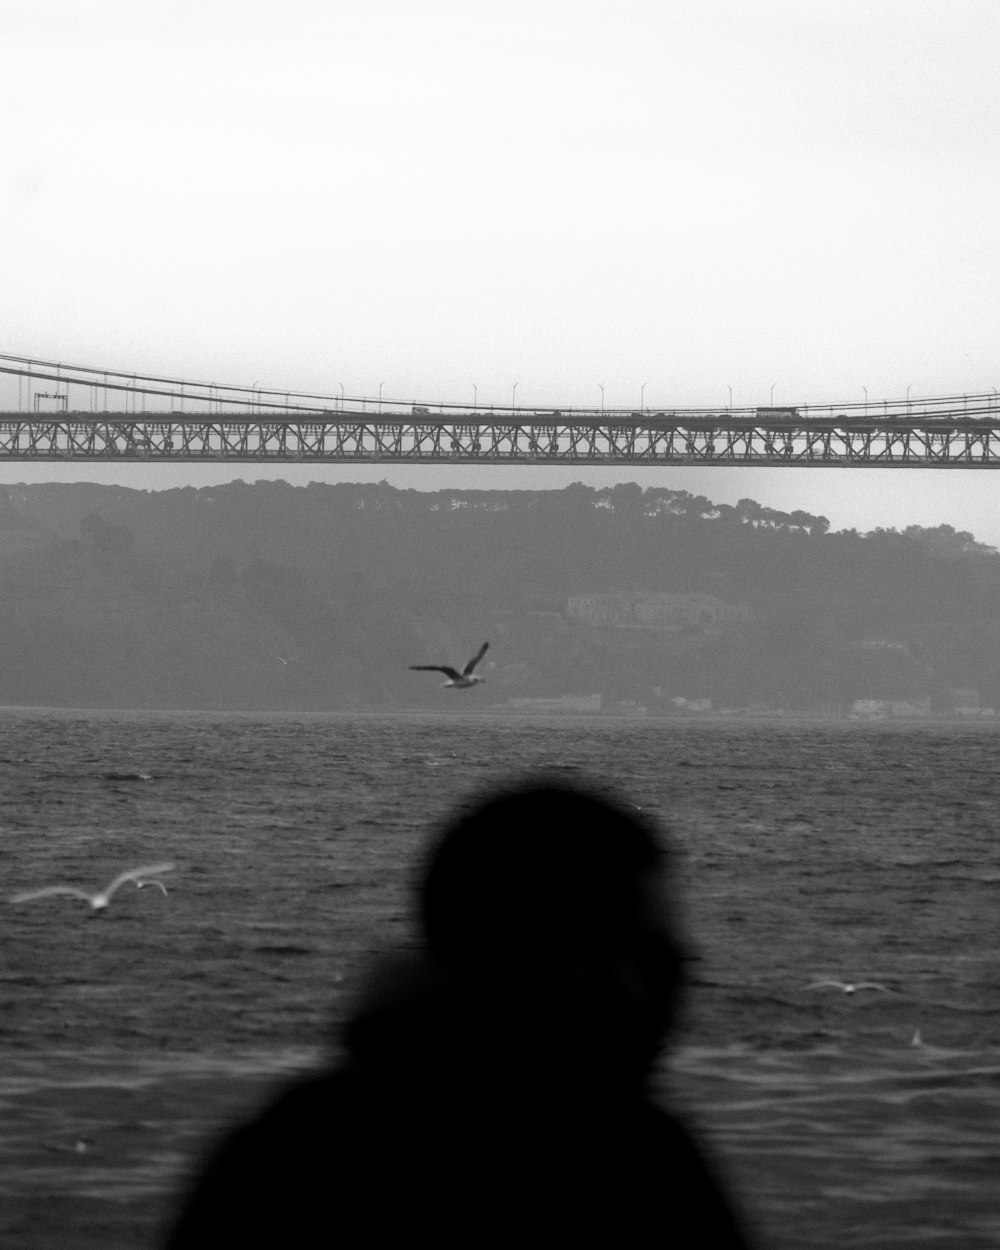 a bird flying over a body of water with a bridge in the background